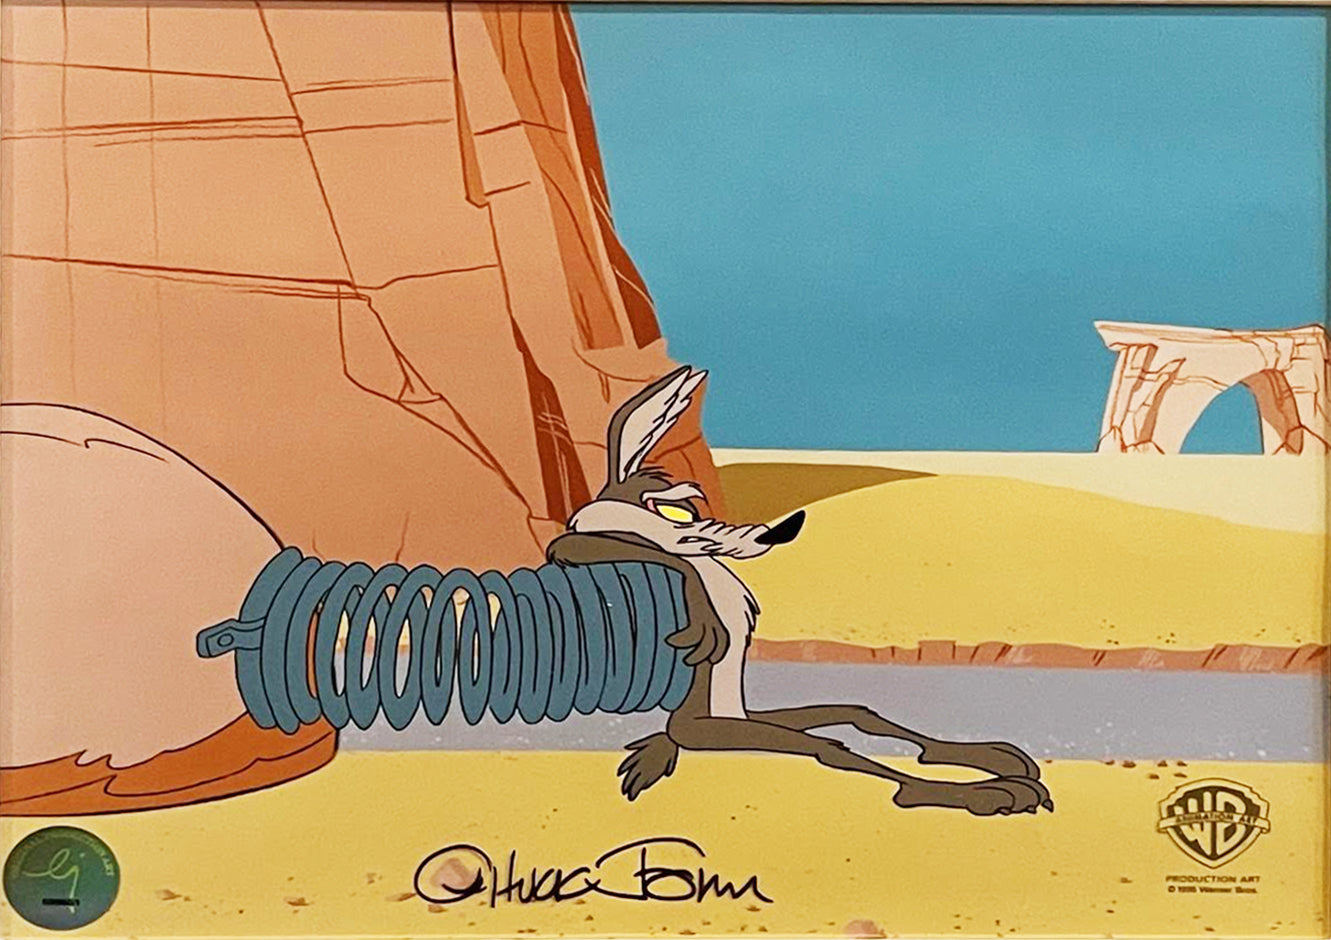 3 Original Warner Brothers Production Cels on Color Copy Backgrounds from Chariots of Fur (1994) featuring Wile E. Coyote